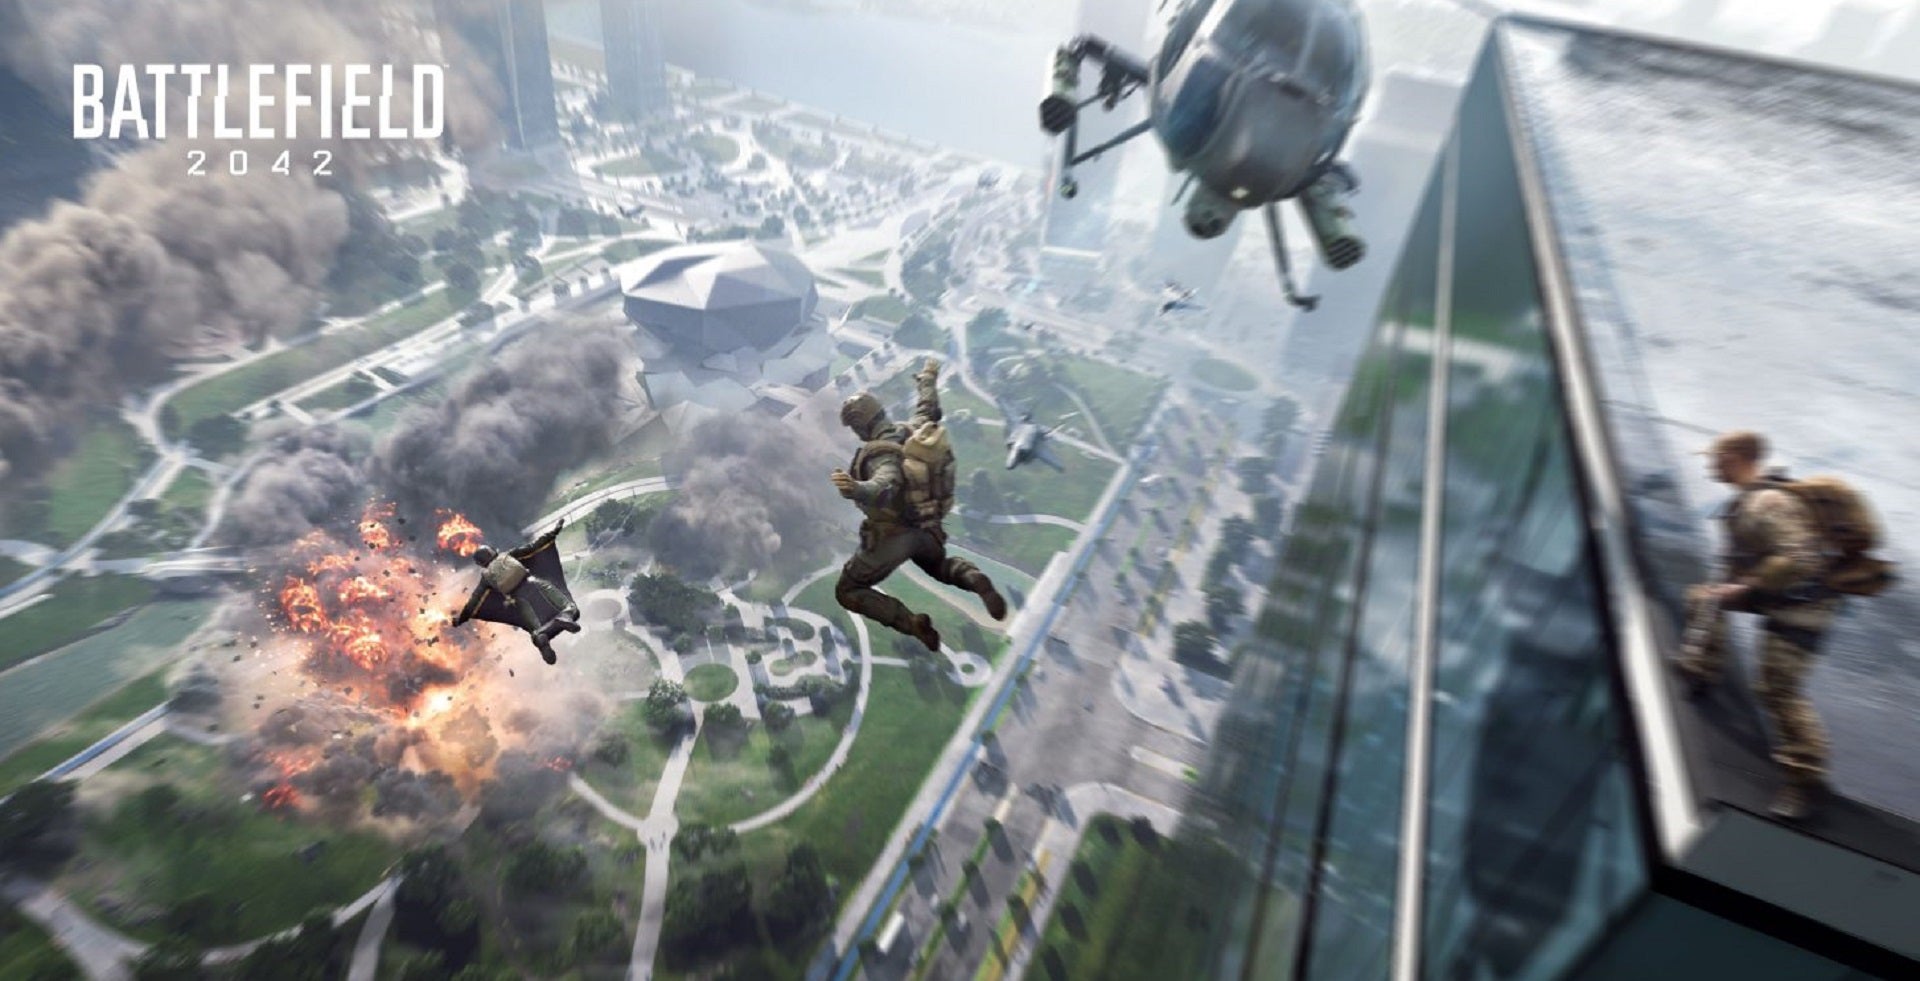 Battlefield 2042 Is Making Some Major Changes Following The Divisive Beta